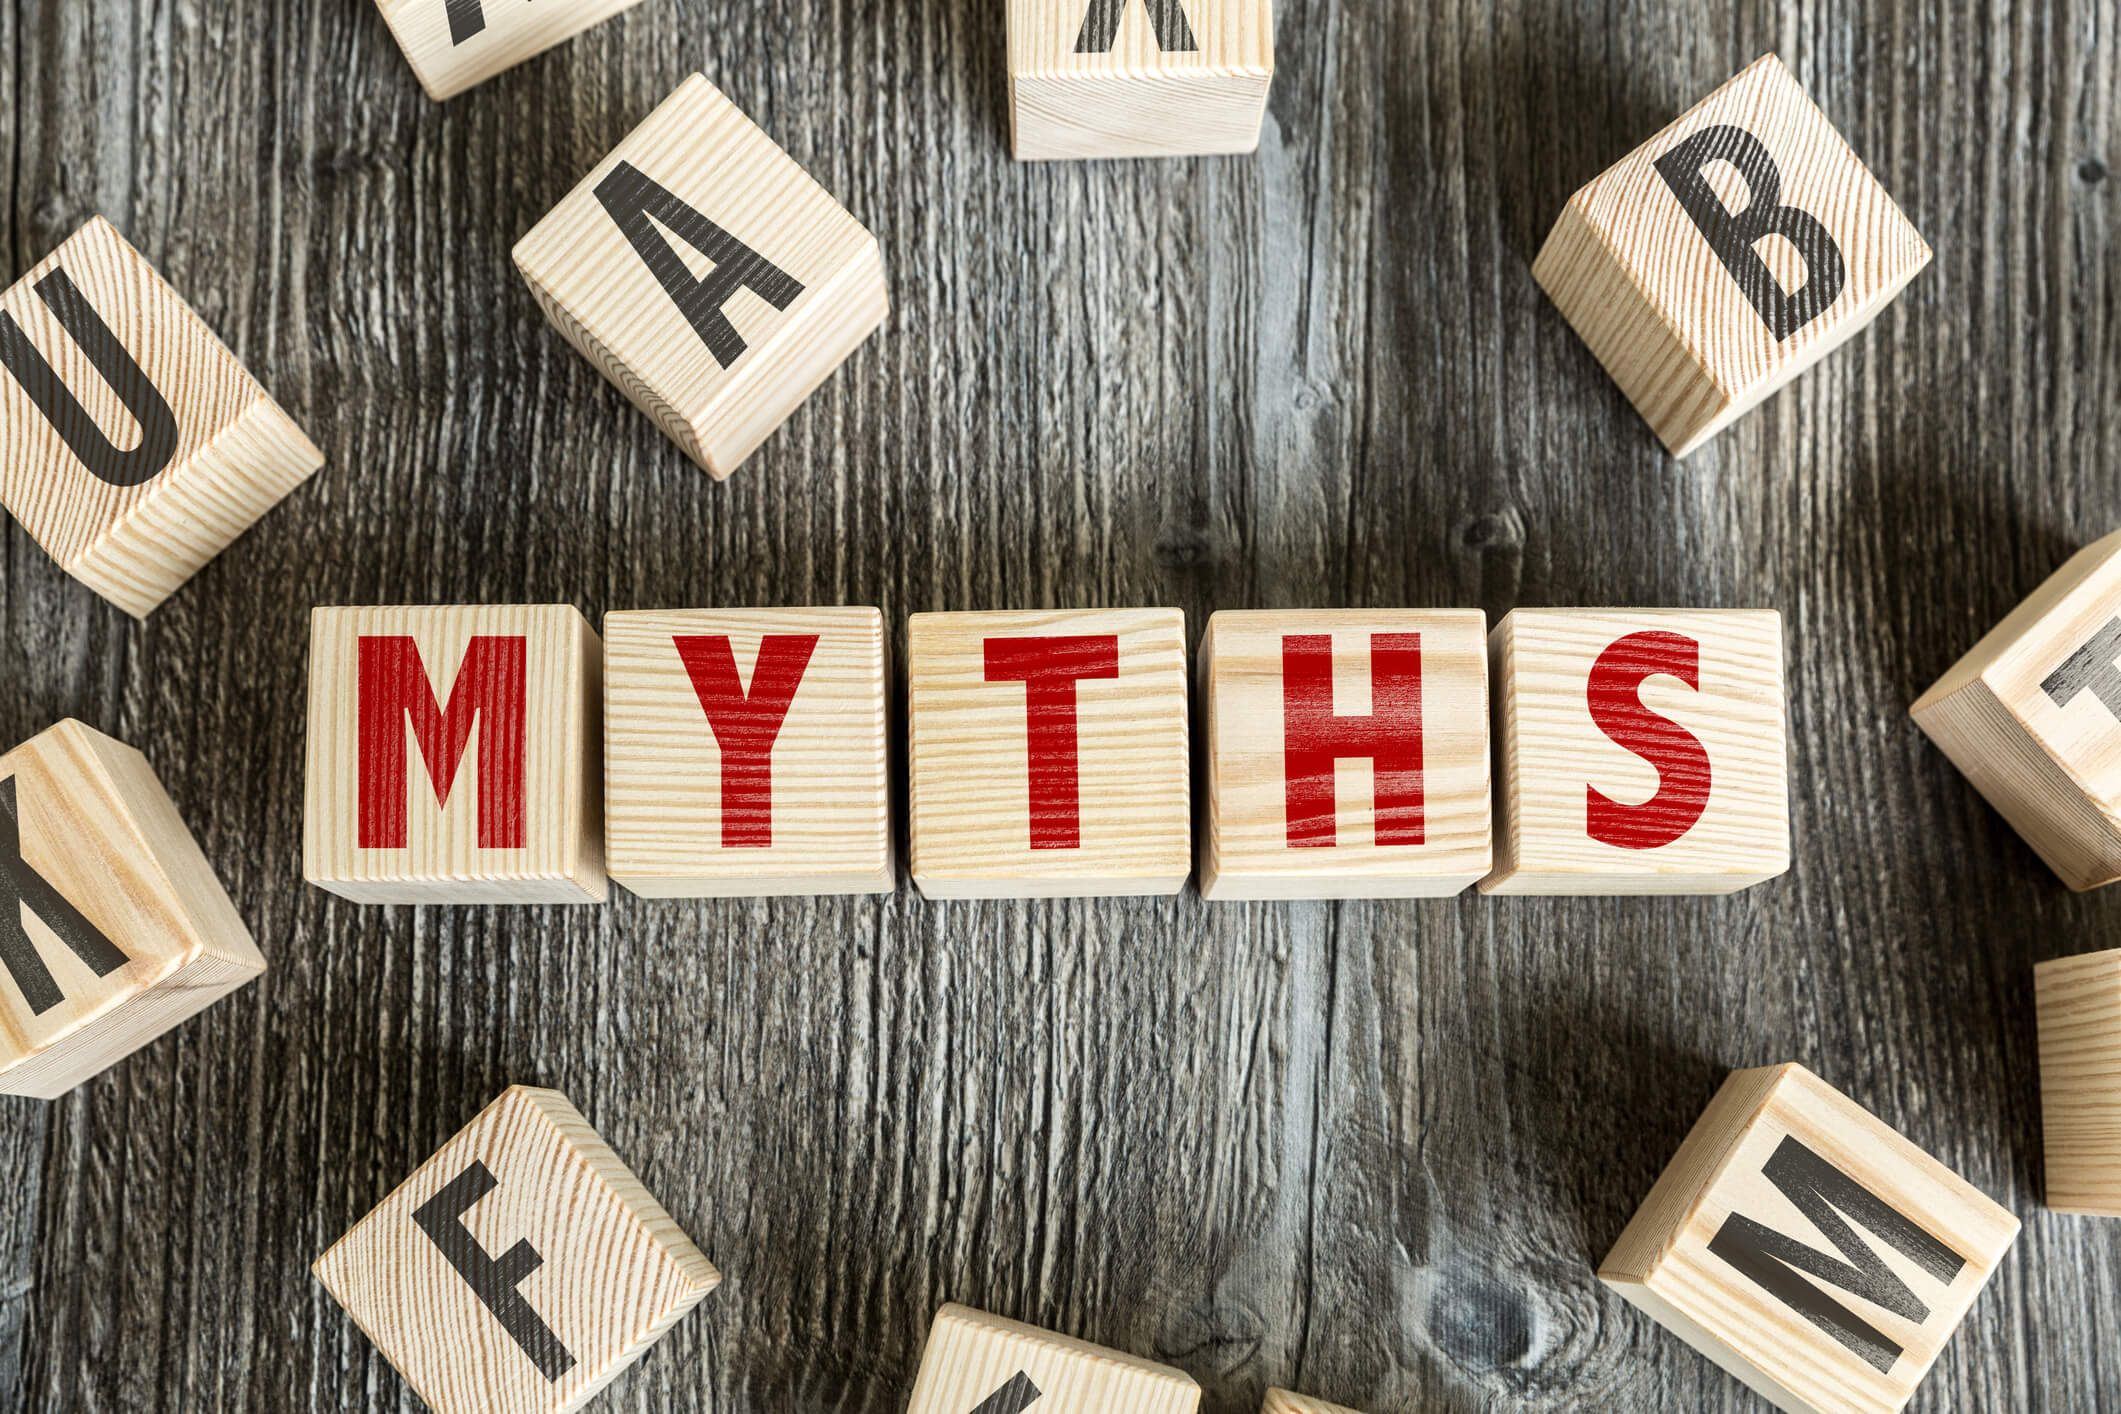 Myths spelled in block letters